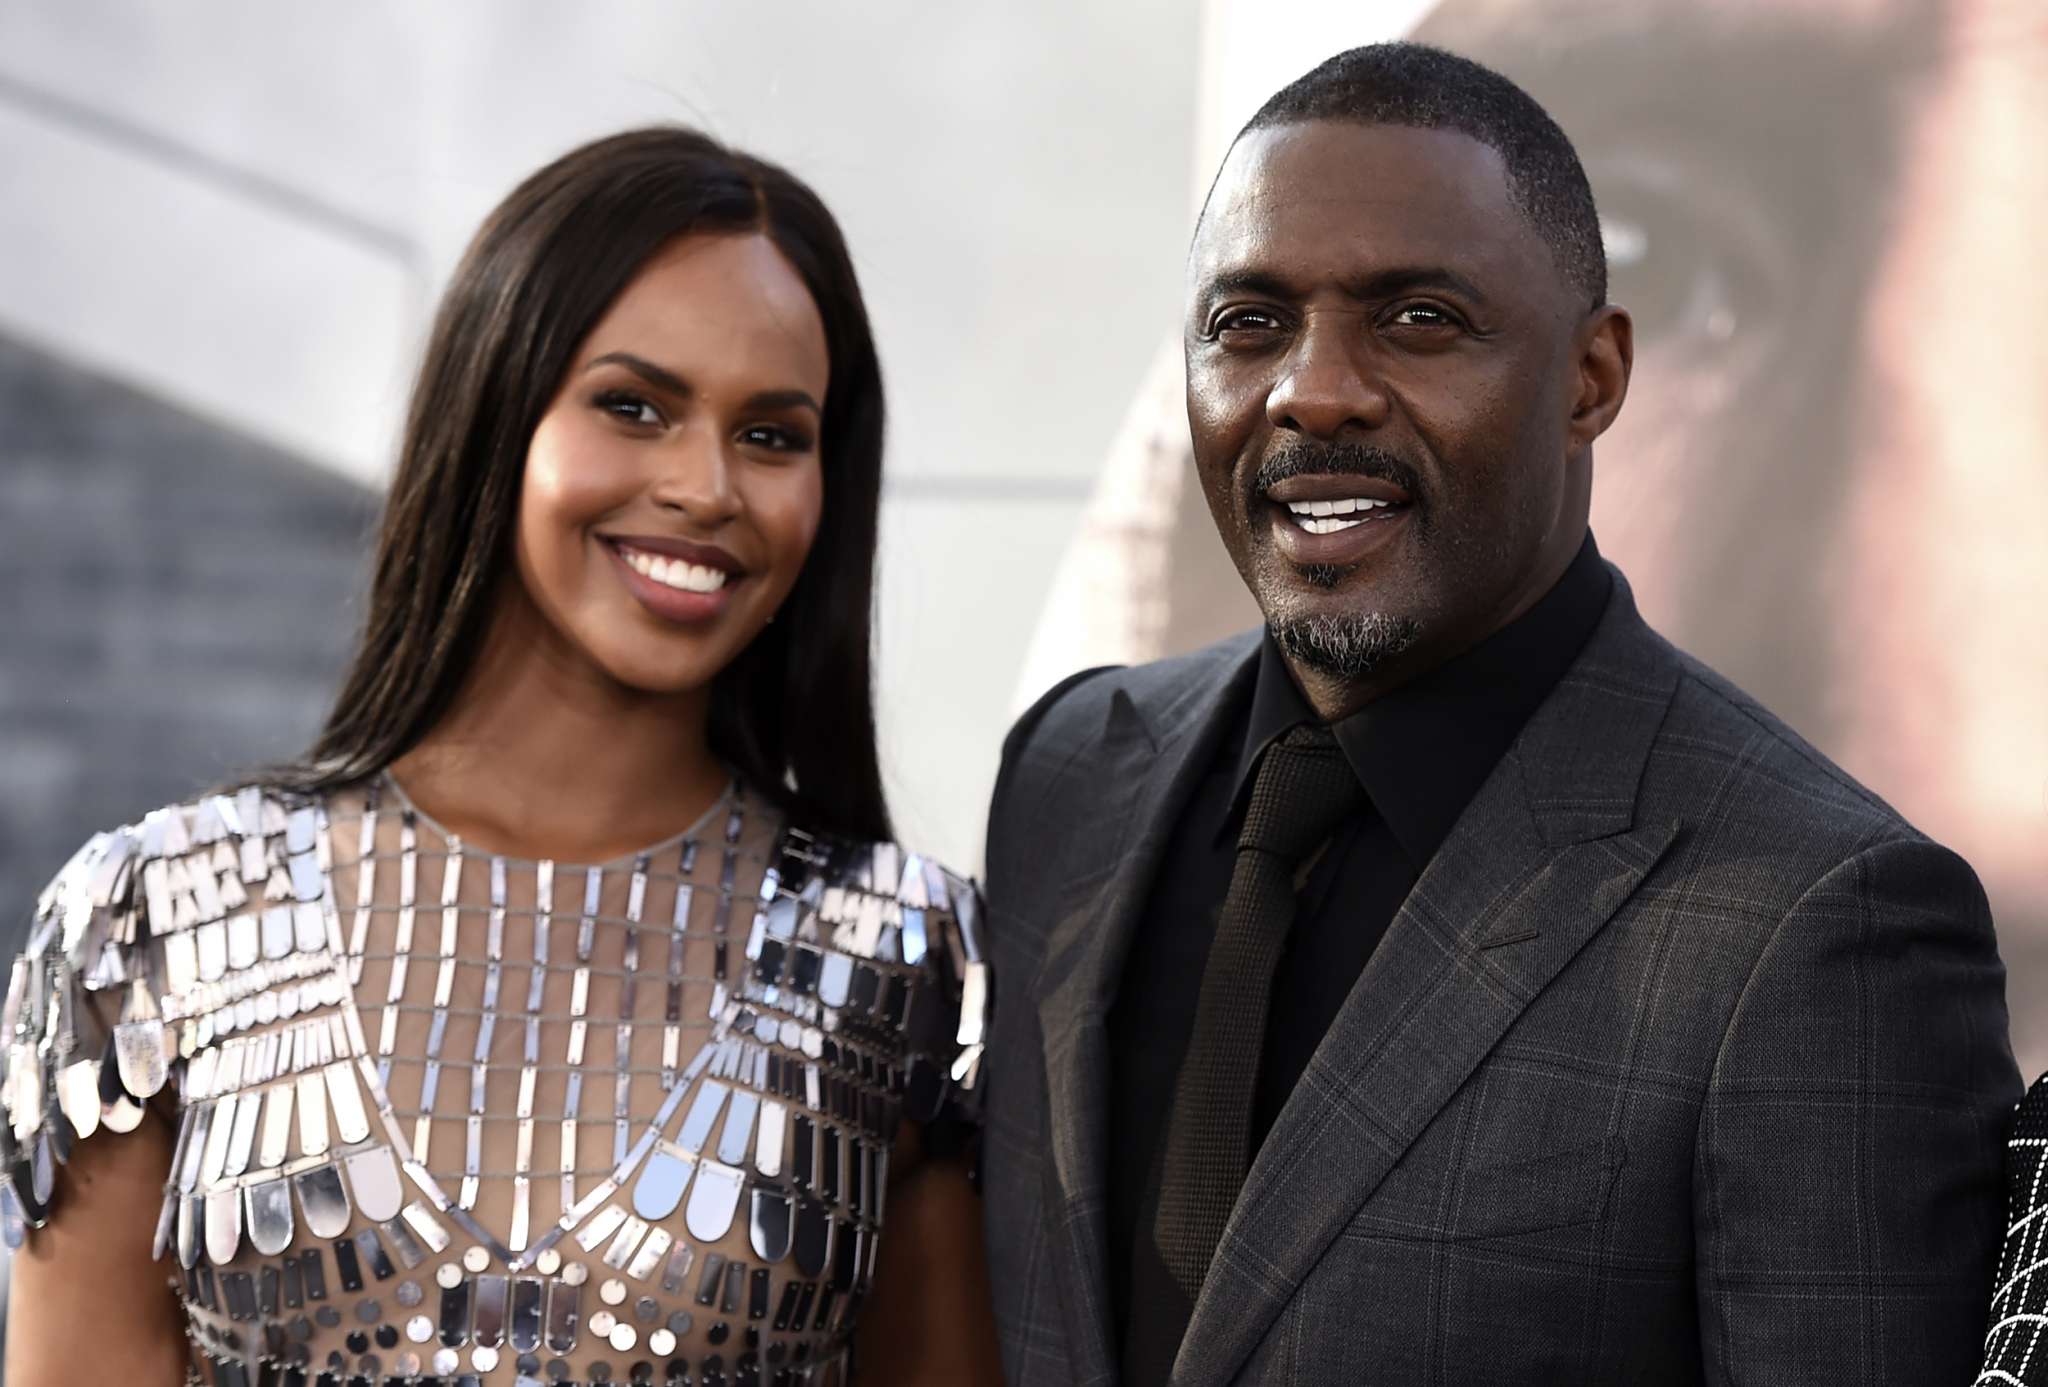 idris-elbas-wife-opens-up-about-their-love-story-and-thriving-marriage